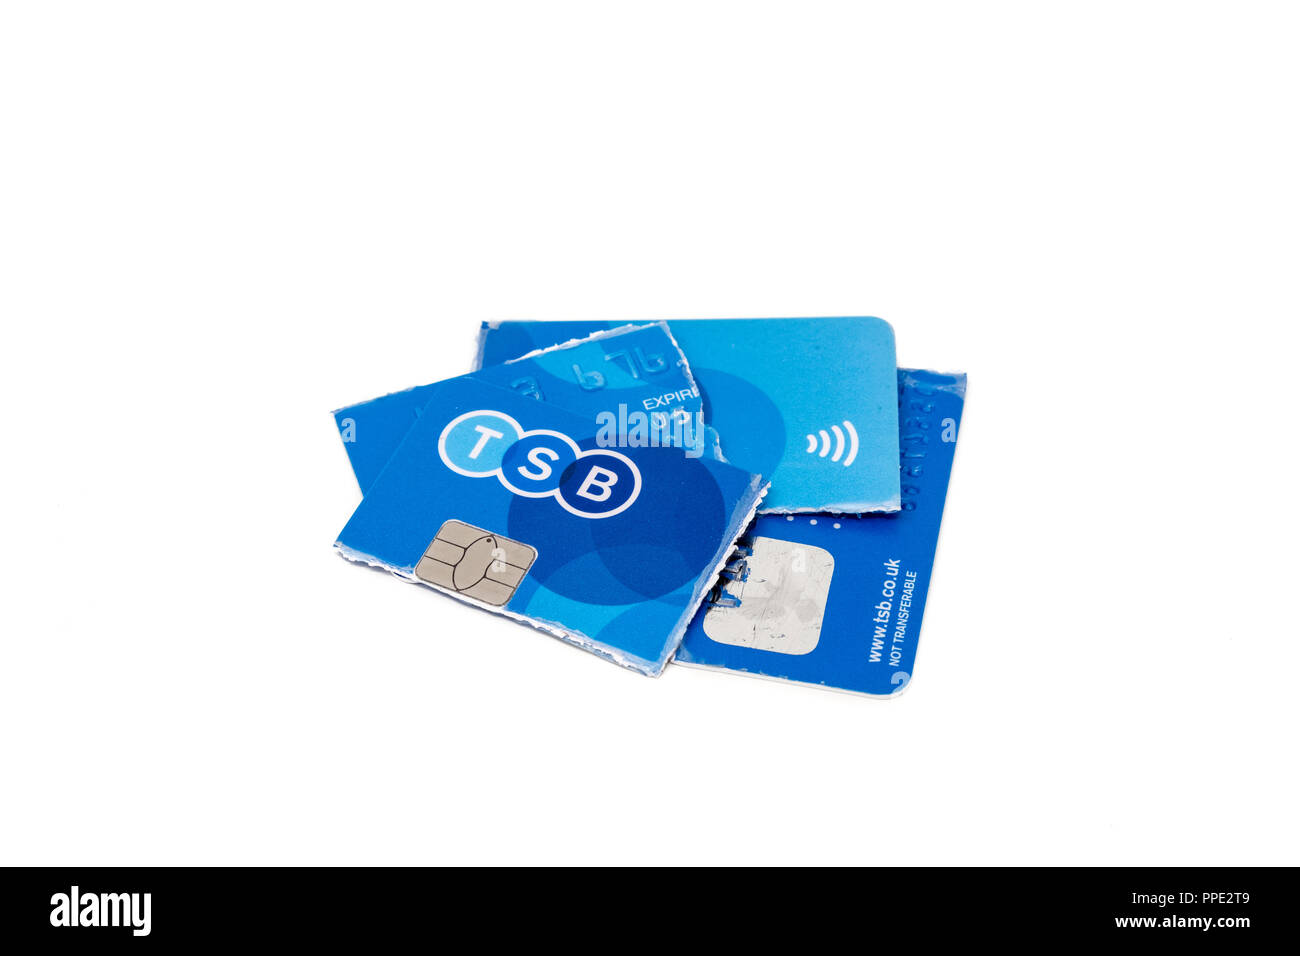 A TSB bank debit card cut up into pieces Stock Photo